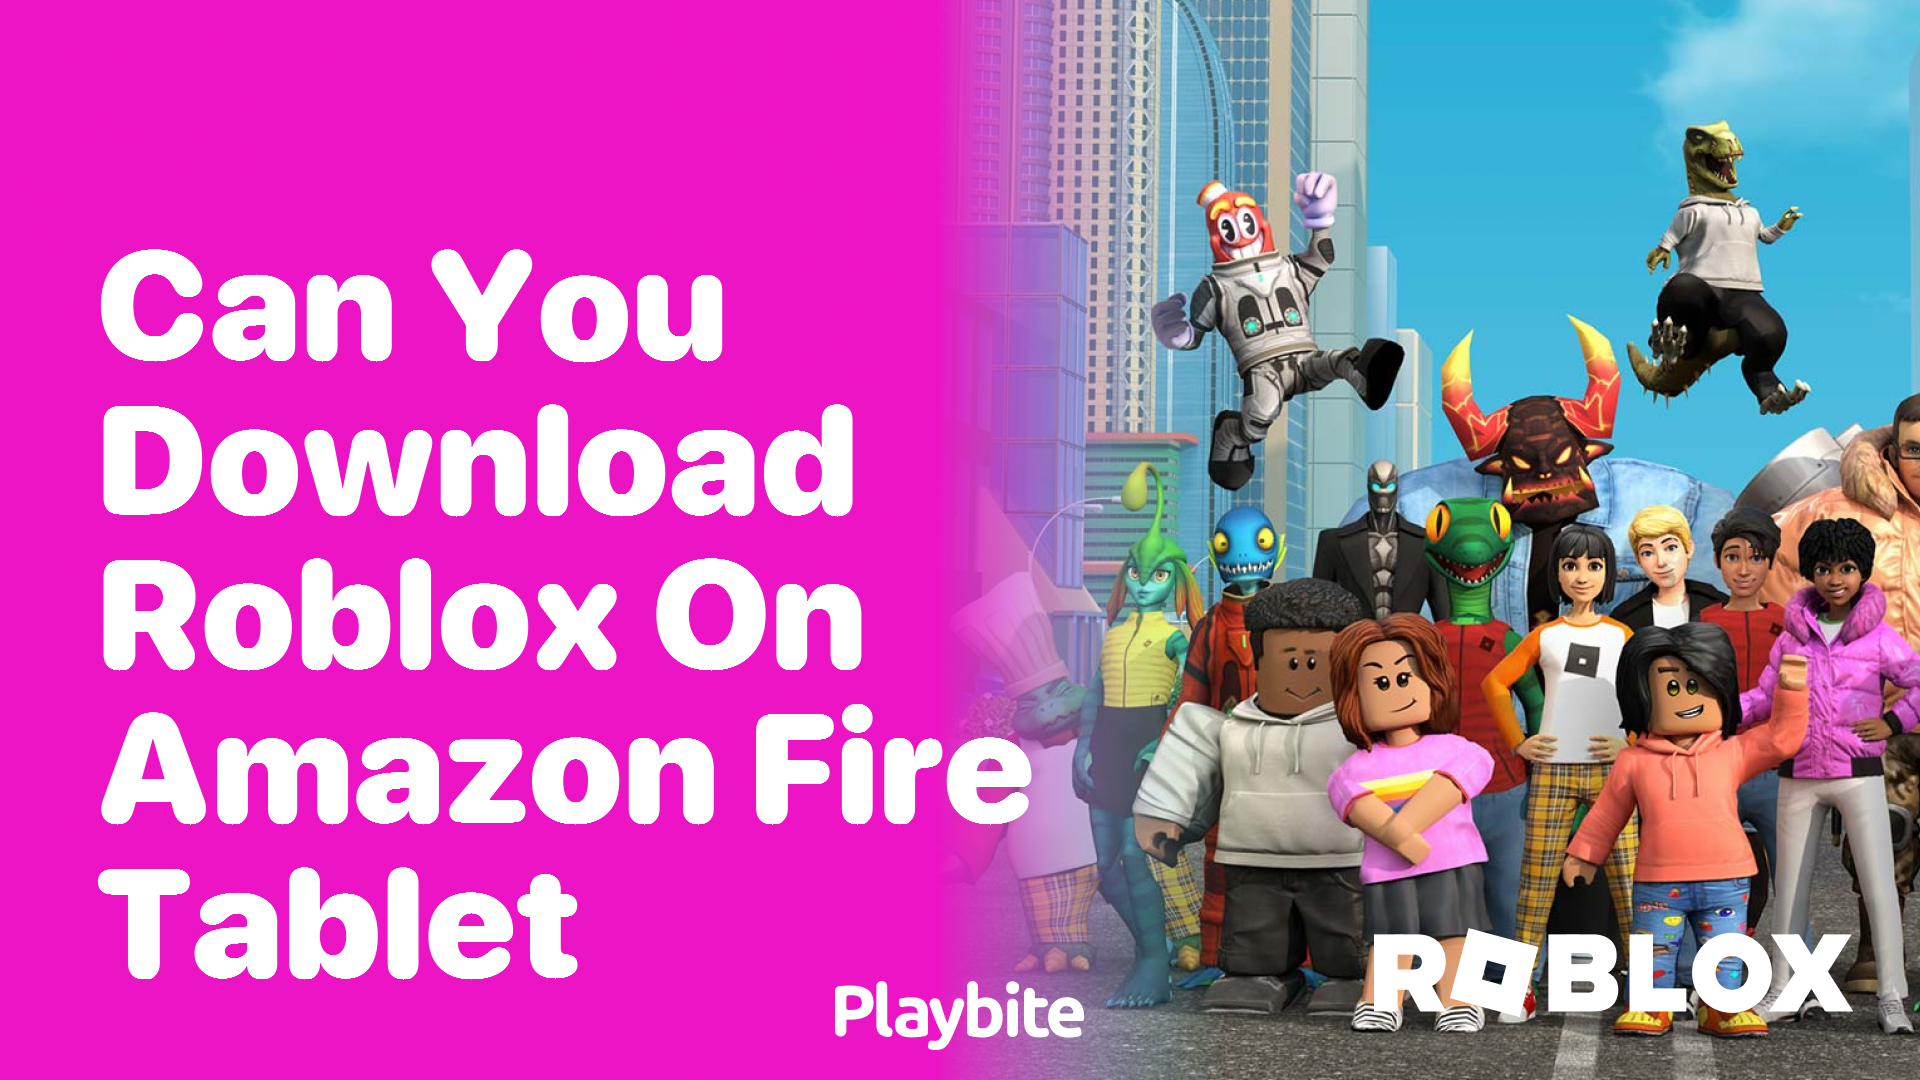 Can You Download Roblox on Amazon Fire Tablet?